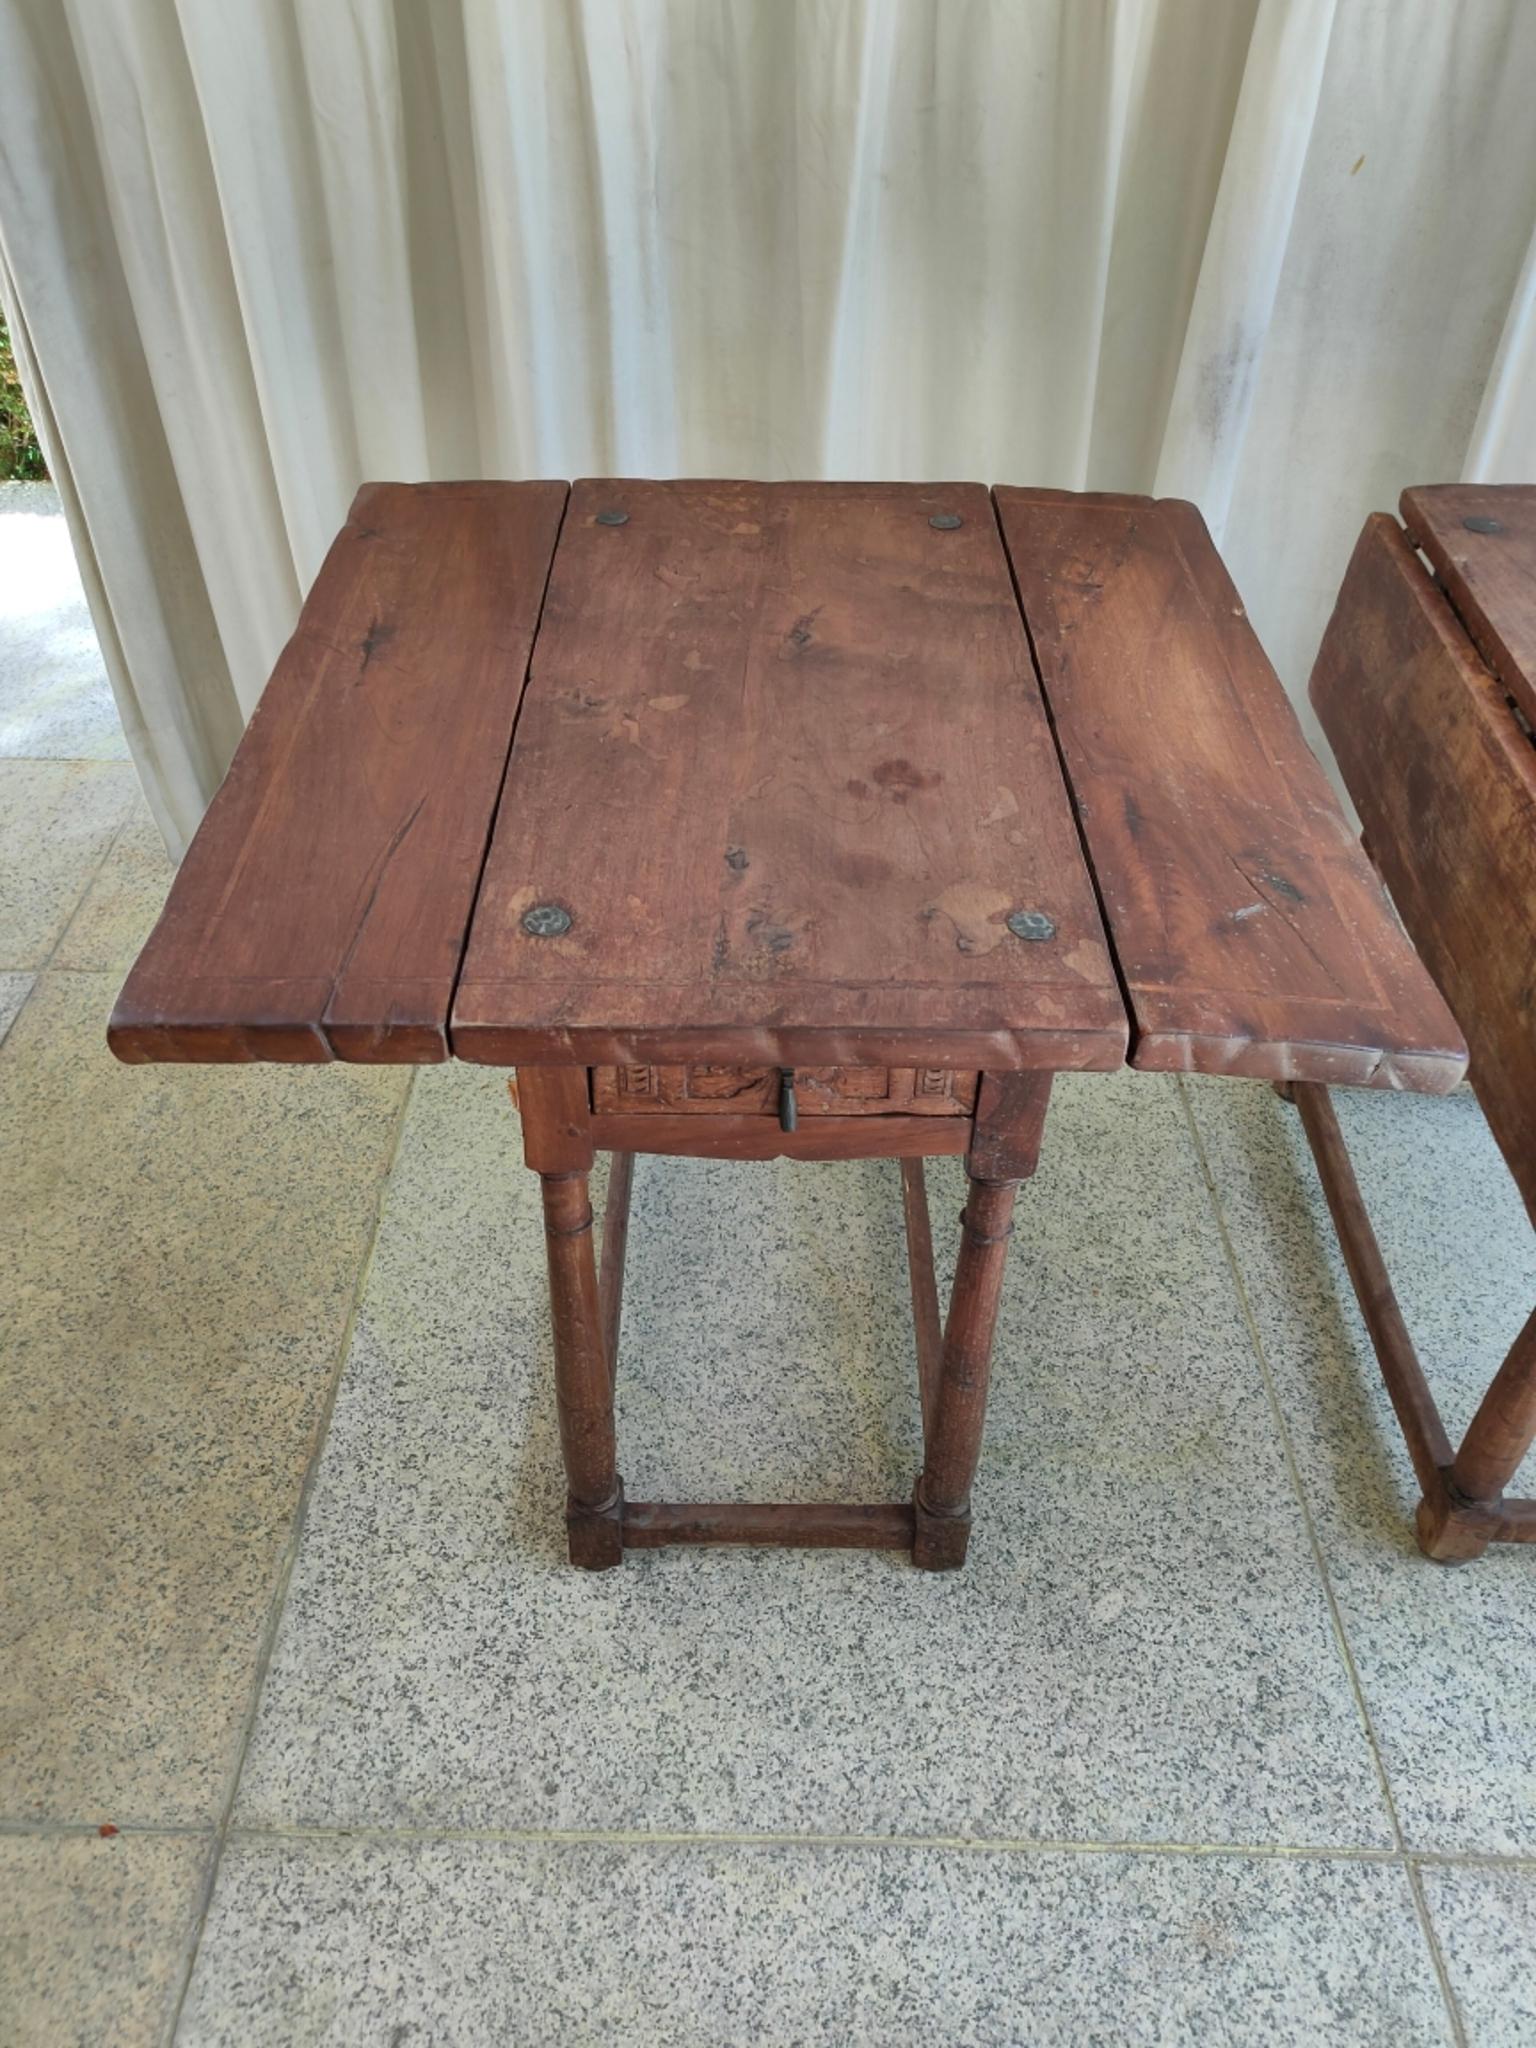 A pair of Spanish side tables, following baroque models, in walnut wood with turned legs and a drawer with an iron handle, the tables can be extended to both sides.